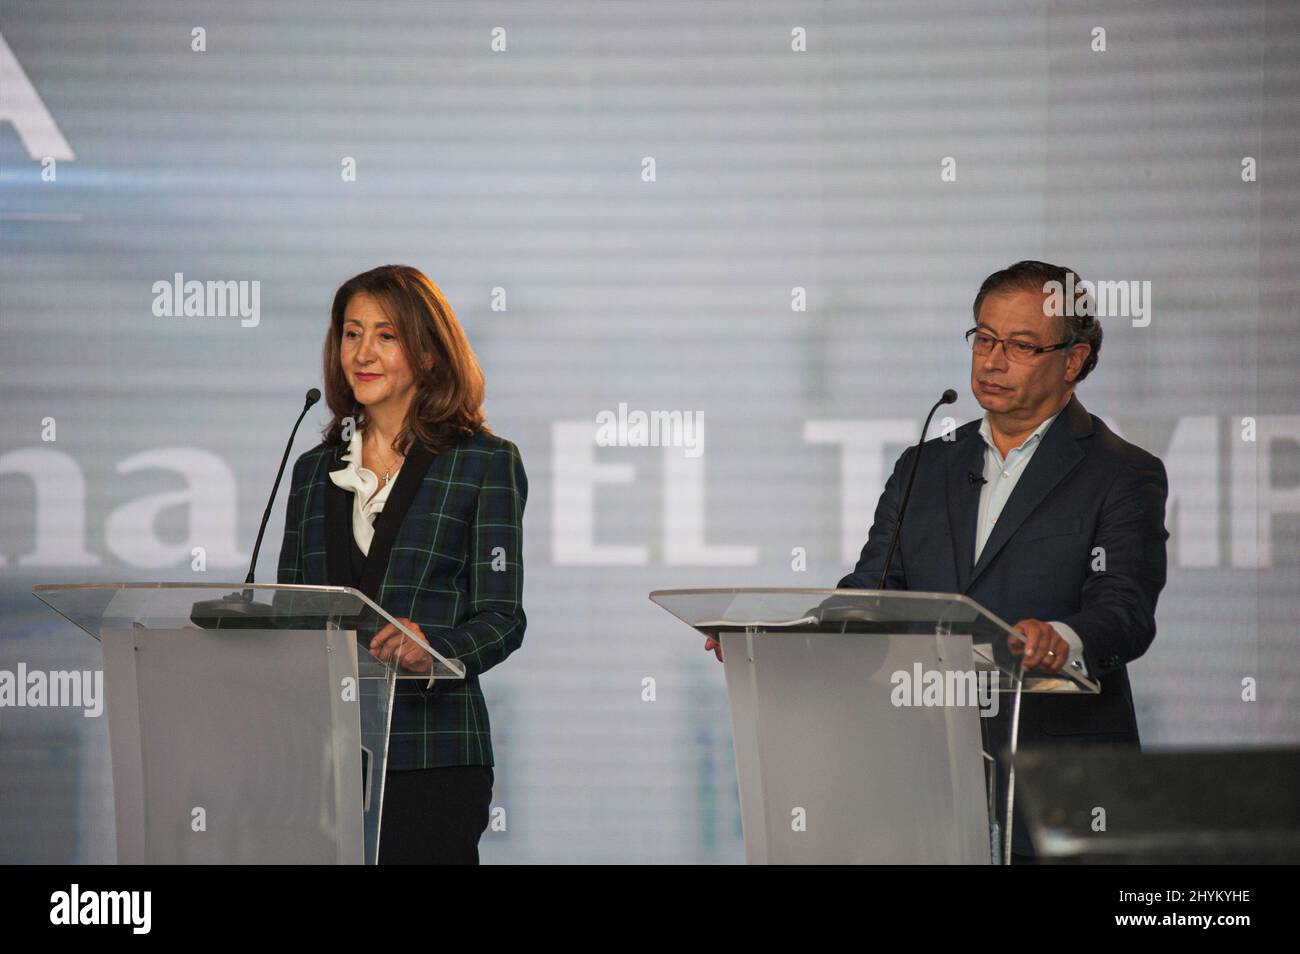 Presidential candidates franch-colombian Ingrid Betancourt for political party 'Partido Verde Oxigeno' and leftist candidate for 'Pacto Historico' Gus Stock Photo